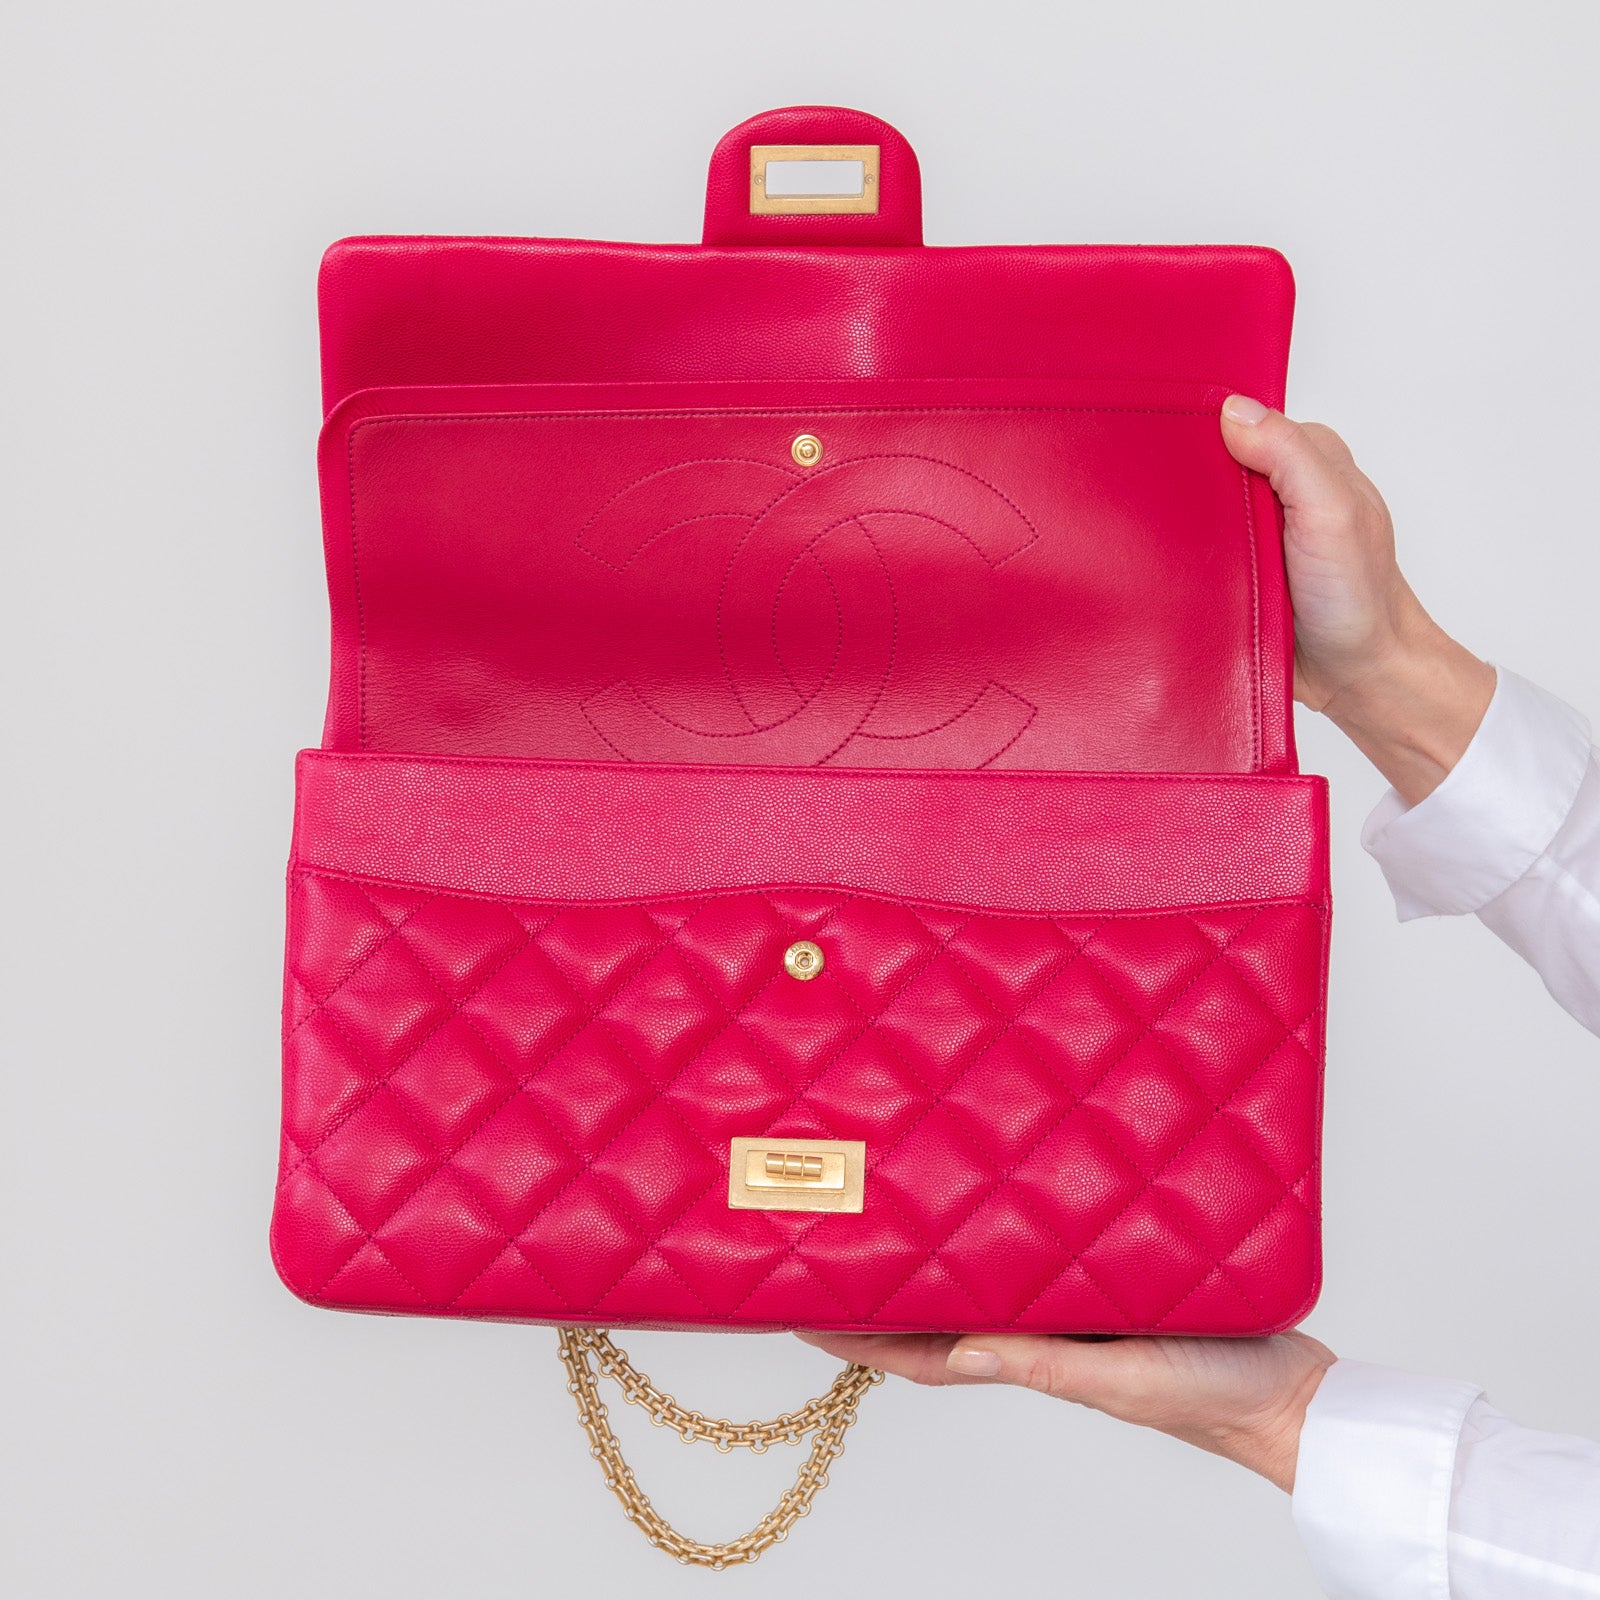 Chanel Chevron Quilted Pink Large Reissue 2.55 Double Flap Bag - Image 8 of 11